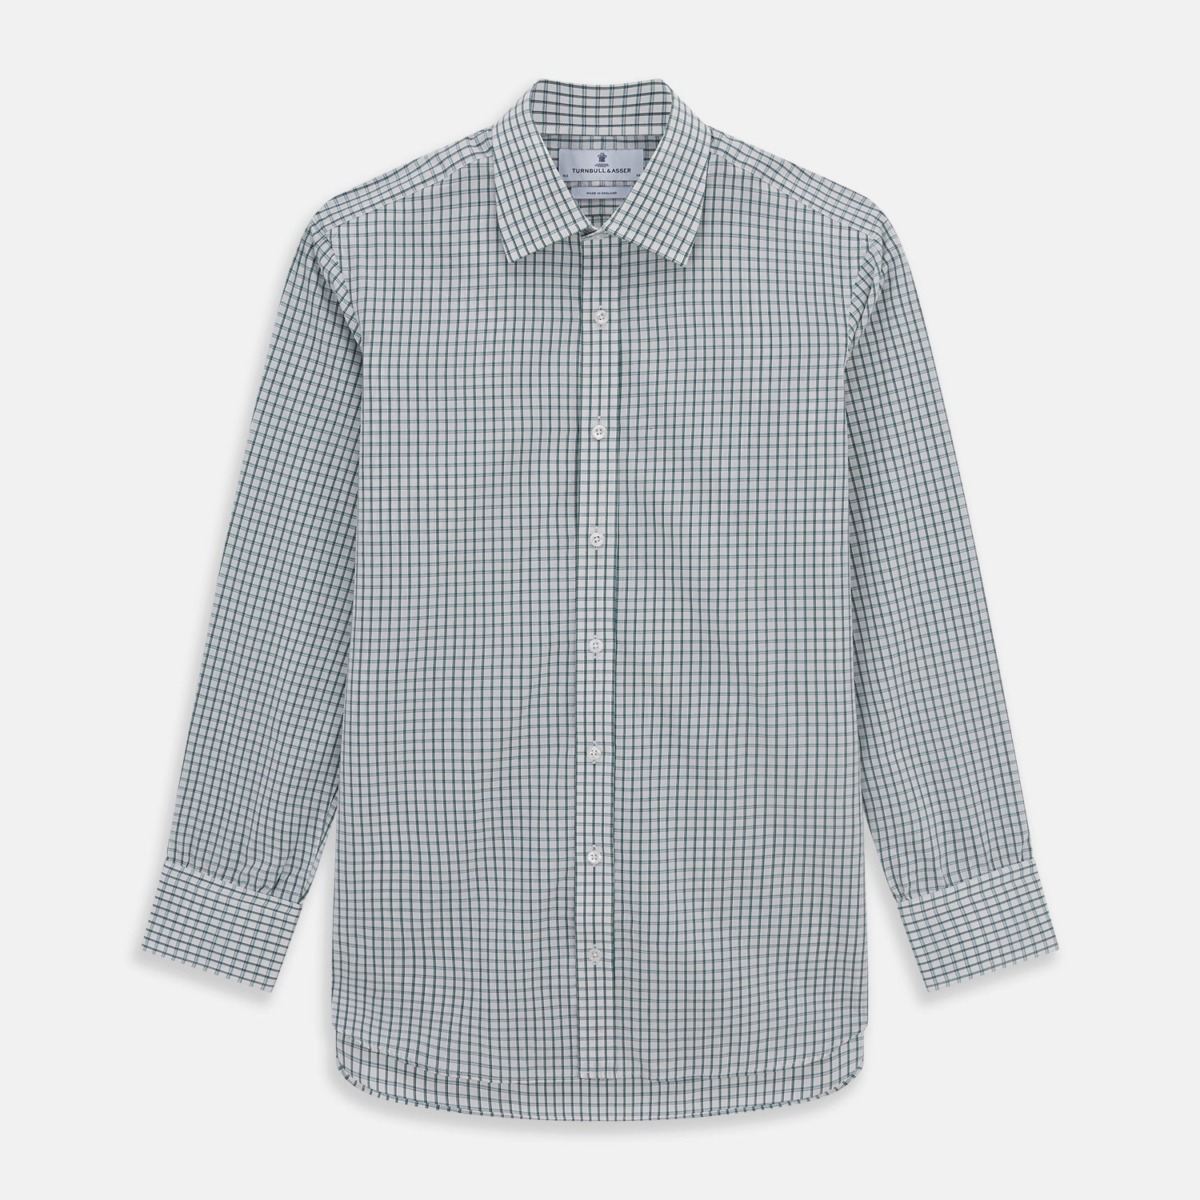 Shirt Checked for Man from Turnbull And Asser GOOFASH